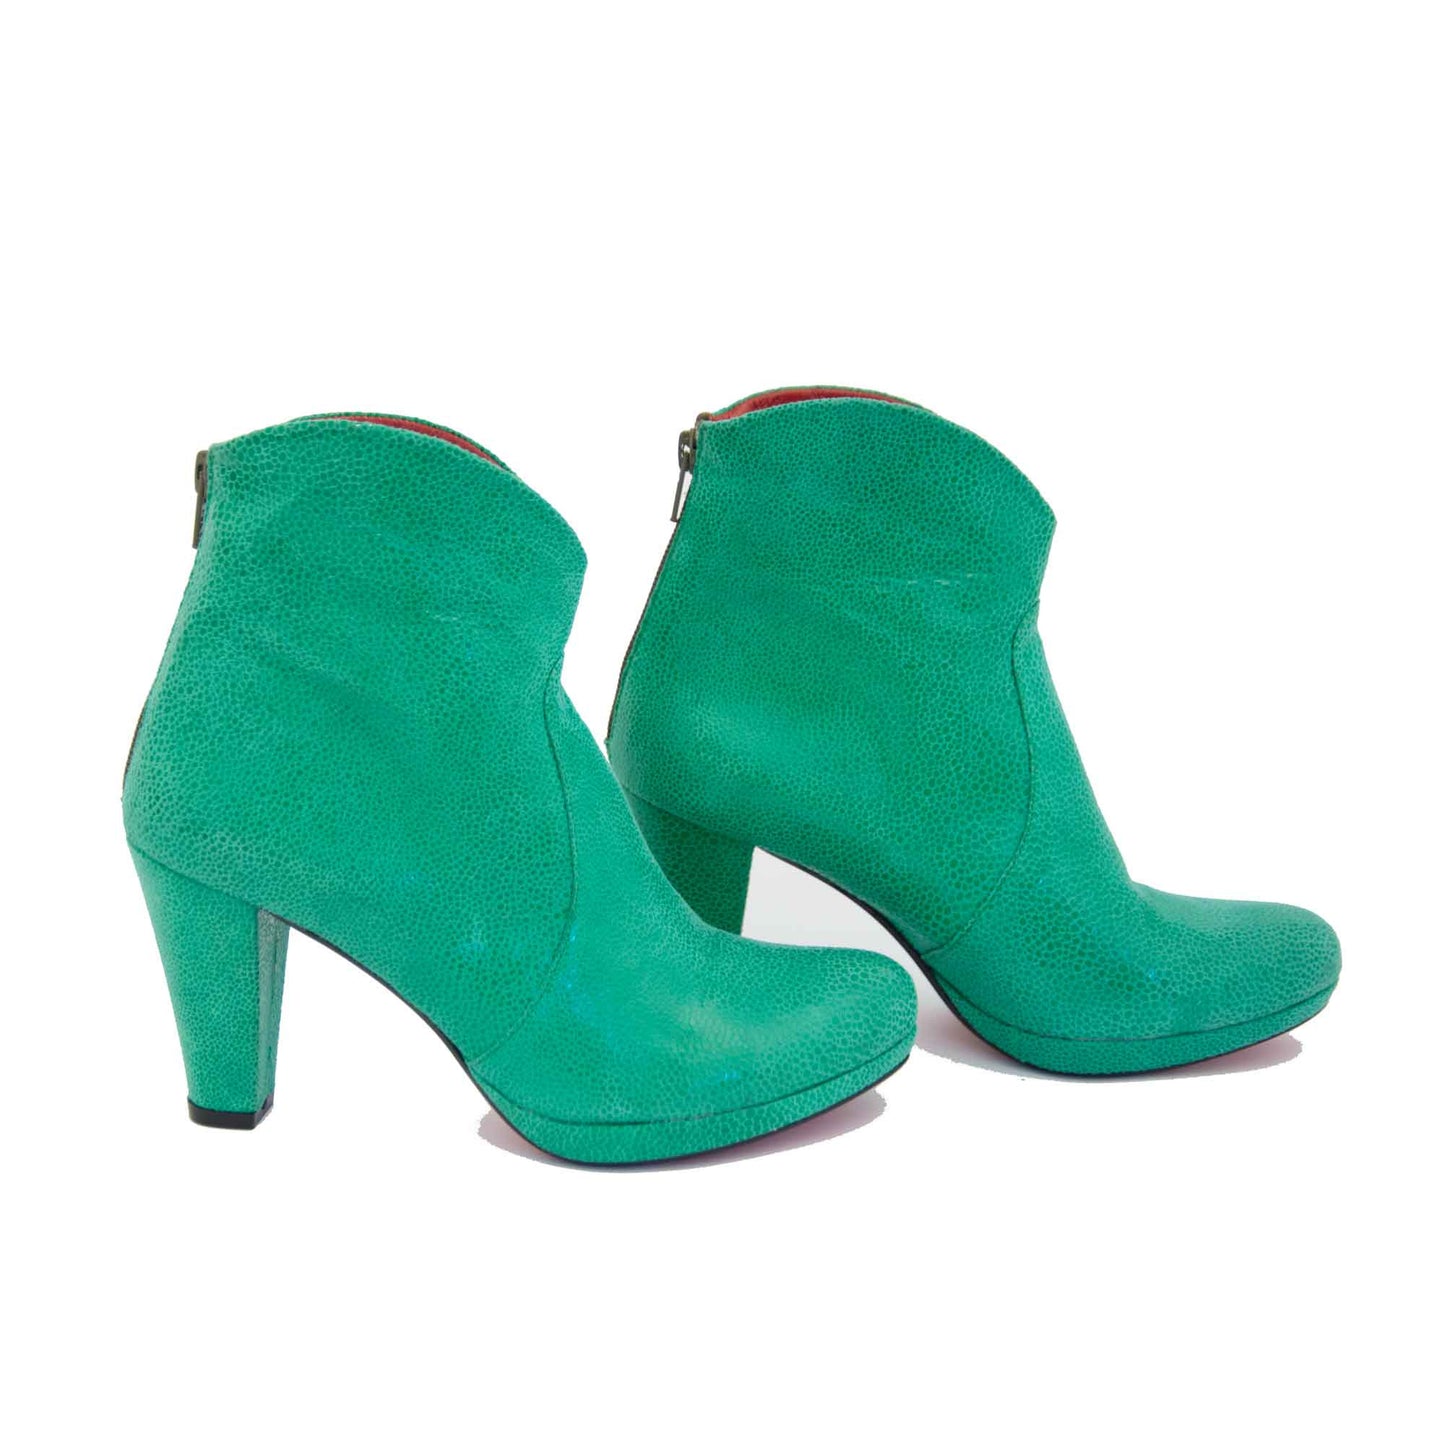 Collette Short Shiny Mint Green Boot